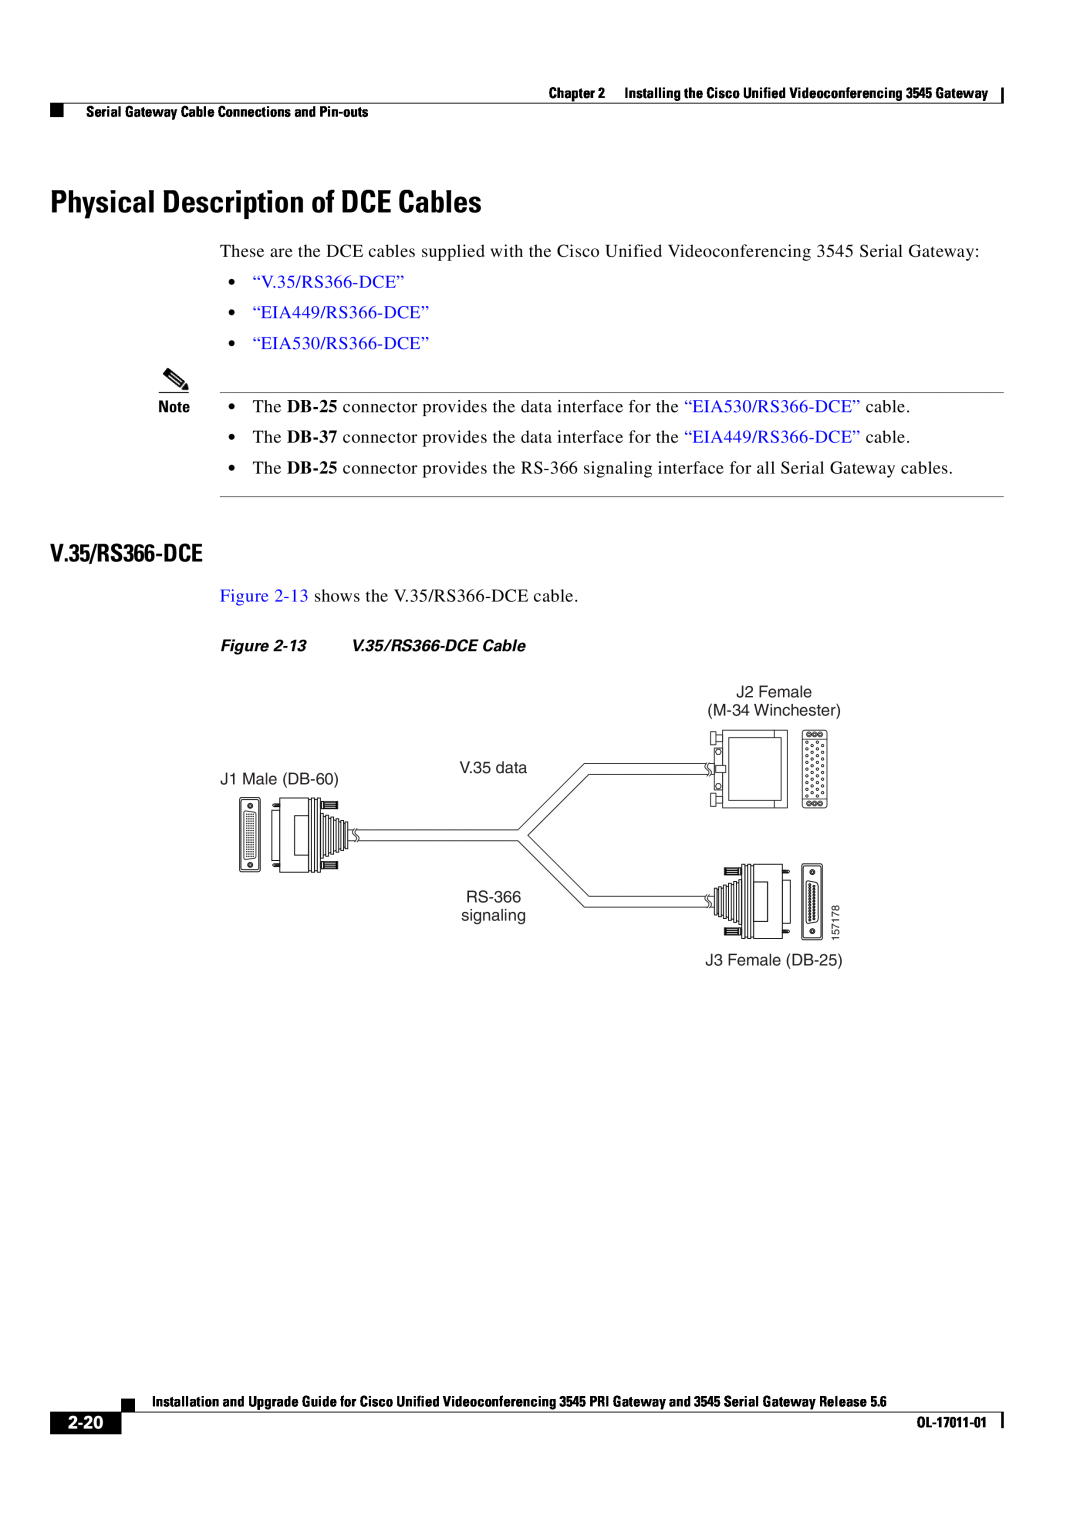 Cisco Systems 3545 PRI Physical Description of DCE Cables, “V.35/RS366-DCE”, “EIA449/RS366-DCE”, “EIA530/RS366-DCE” 